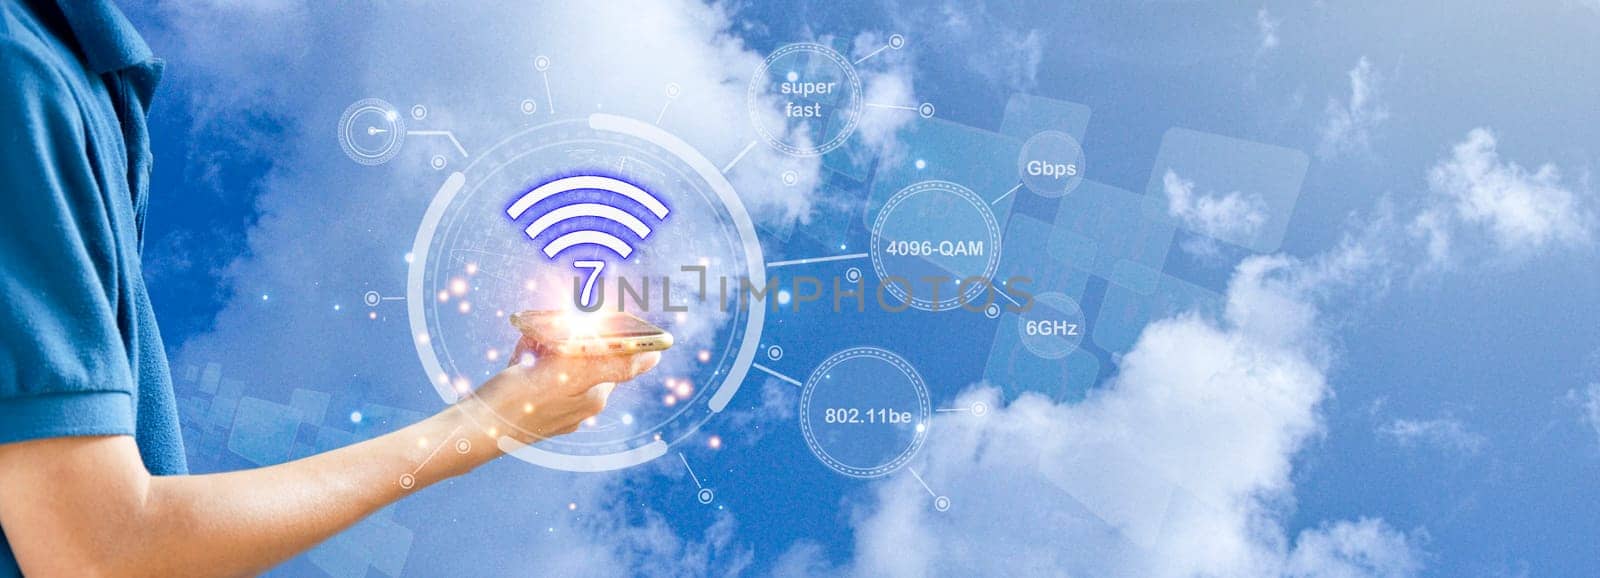 Concept of Wi-Fi 7 or Wi-Fi 7 development, high-speed connection